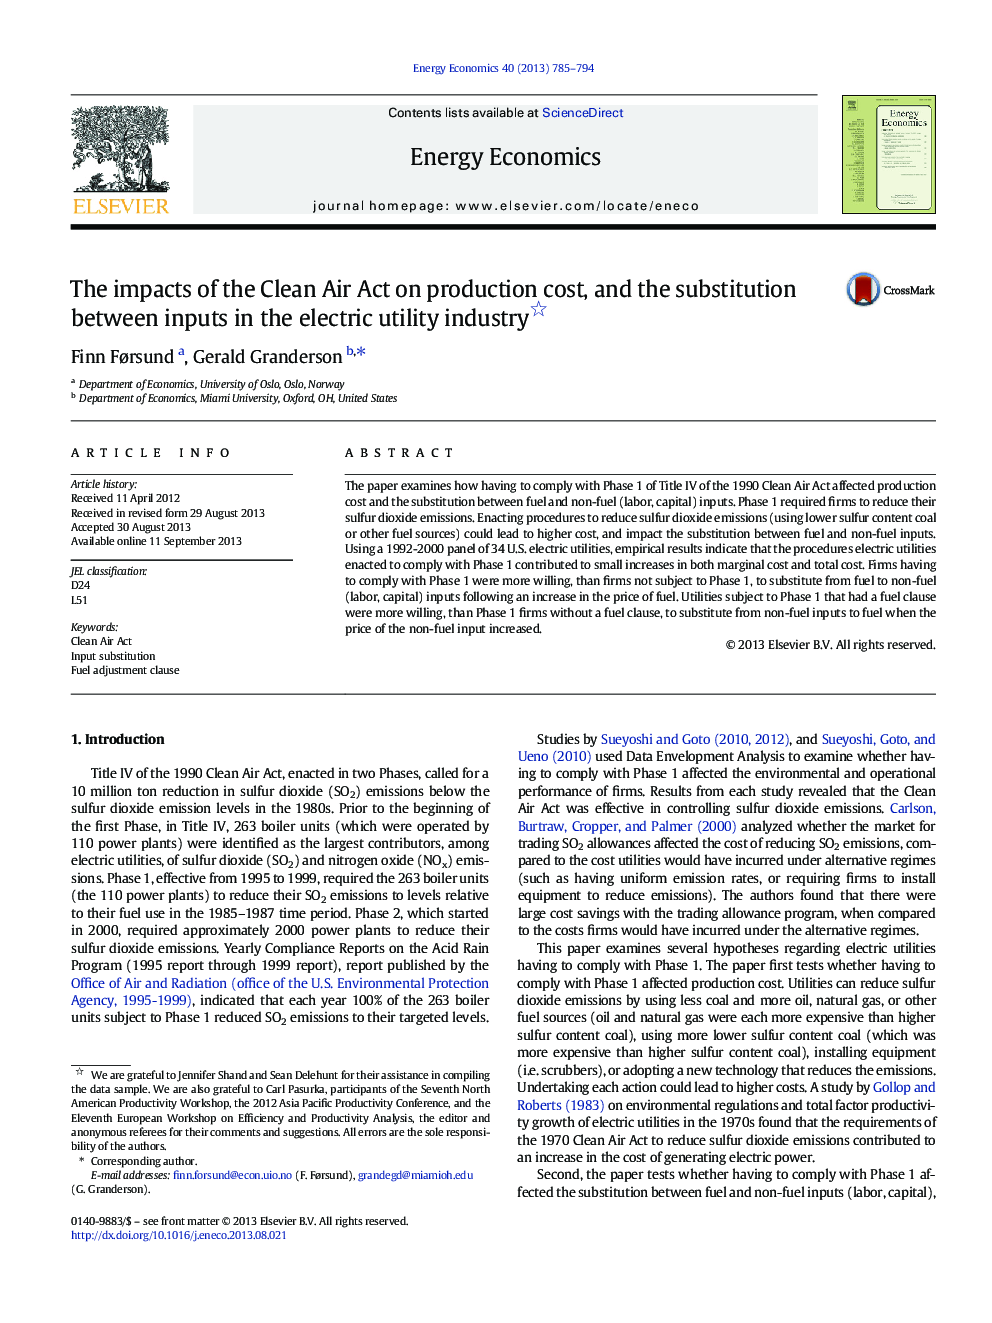 The impacts of the Clean Air Act on production cost, and the substitution between inputs in the electric utility industry